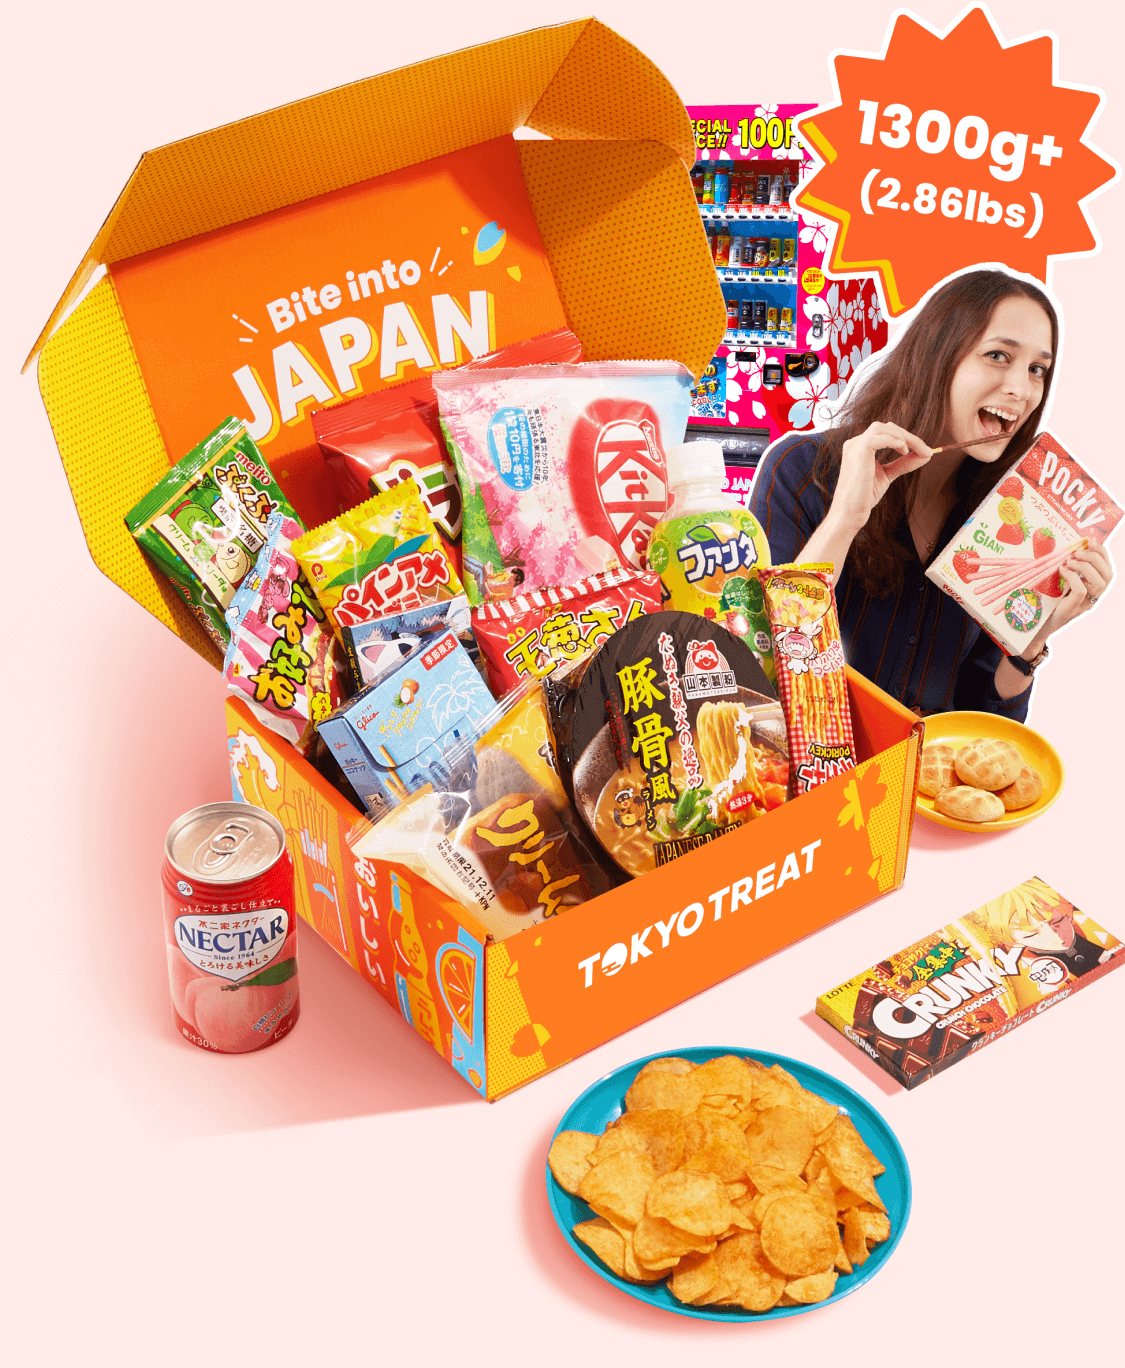 TokyoTreat What's in my box banner